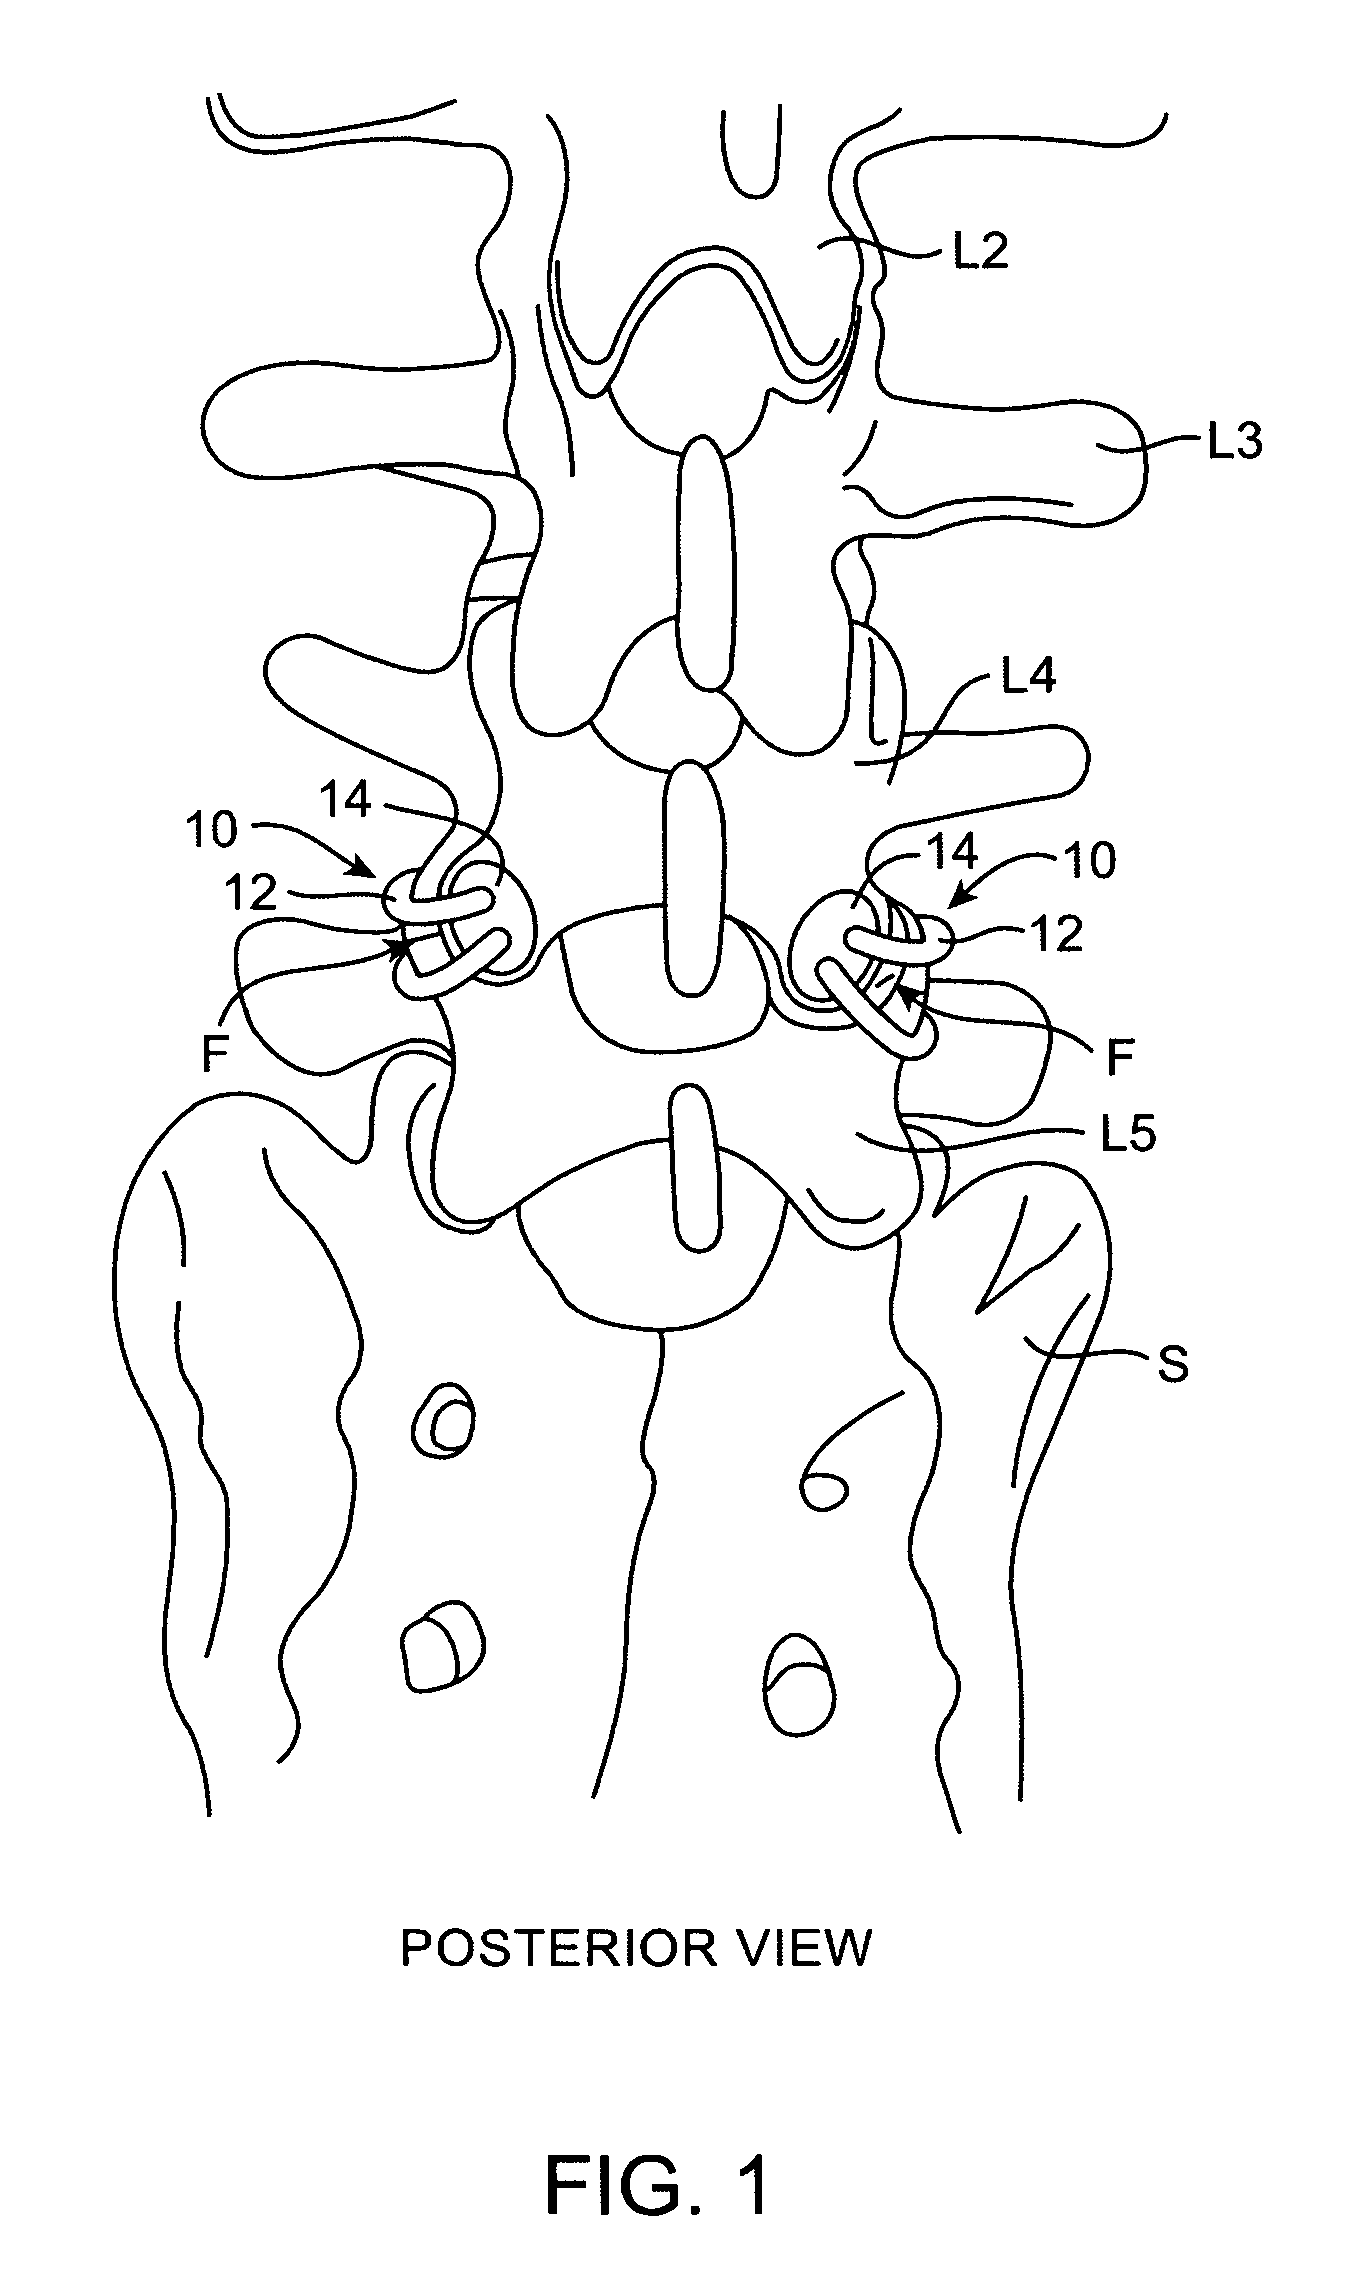 Facet joint fusion devices and methods